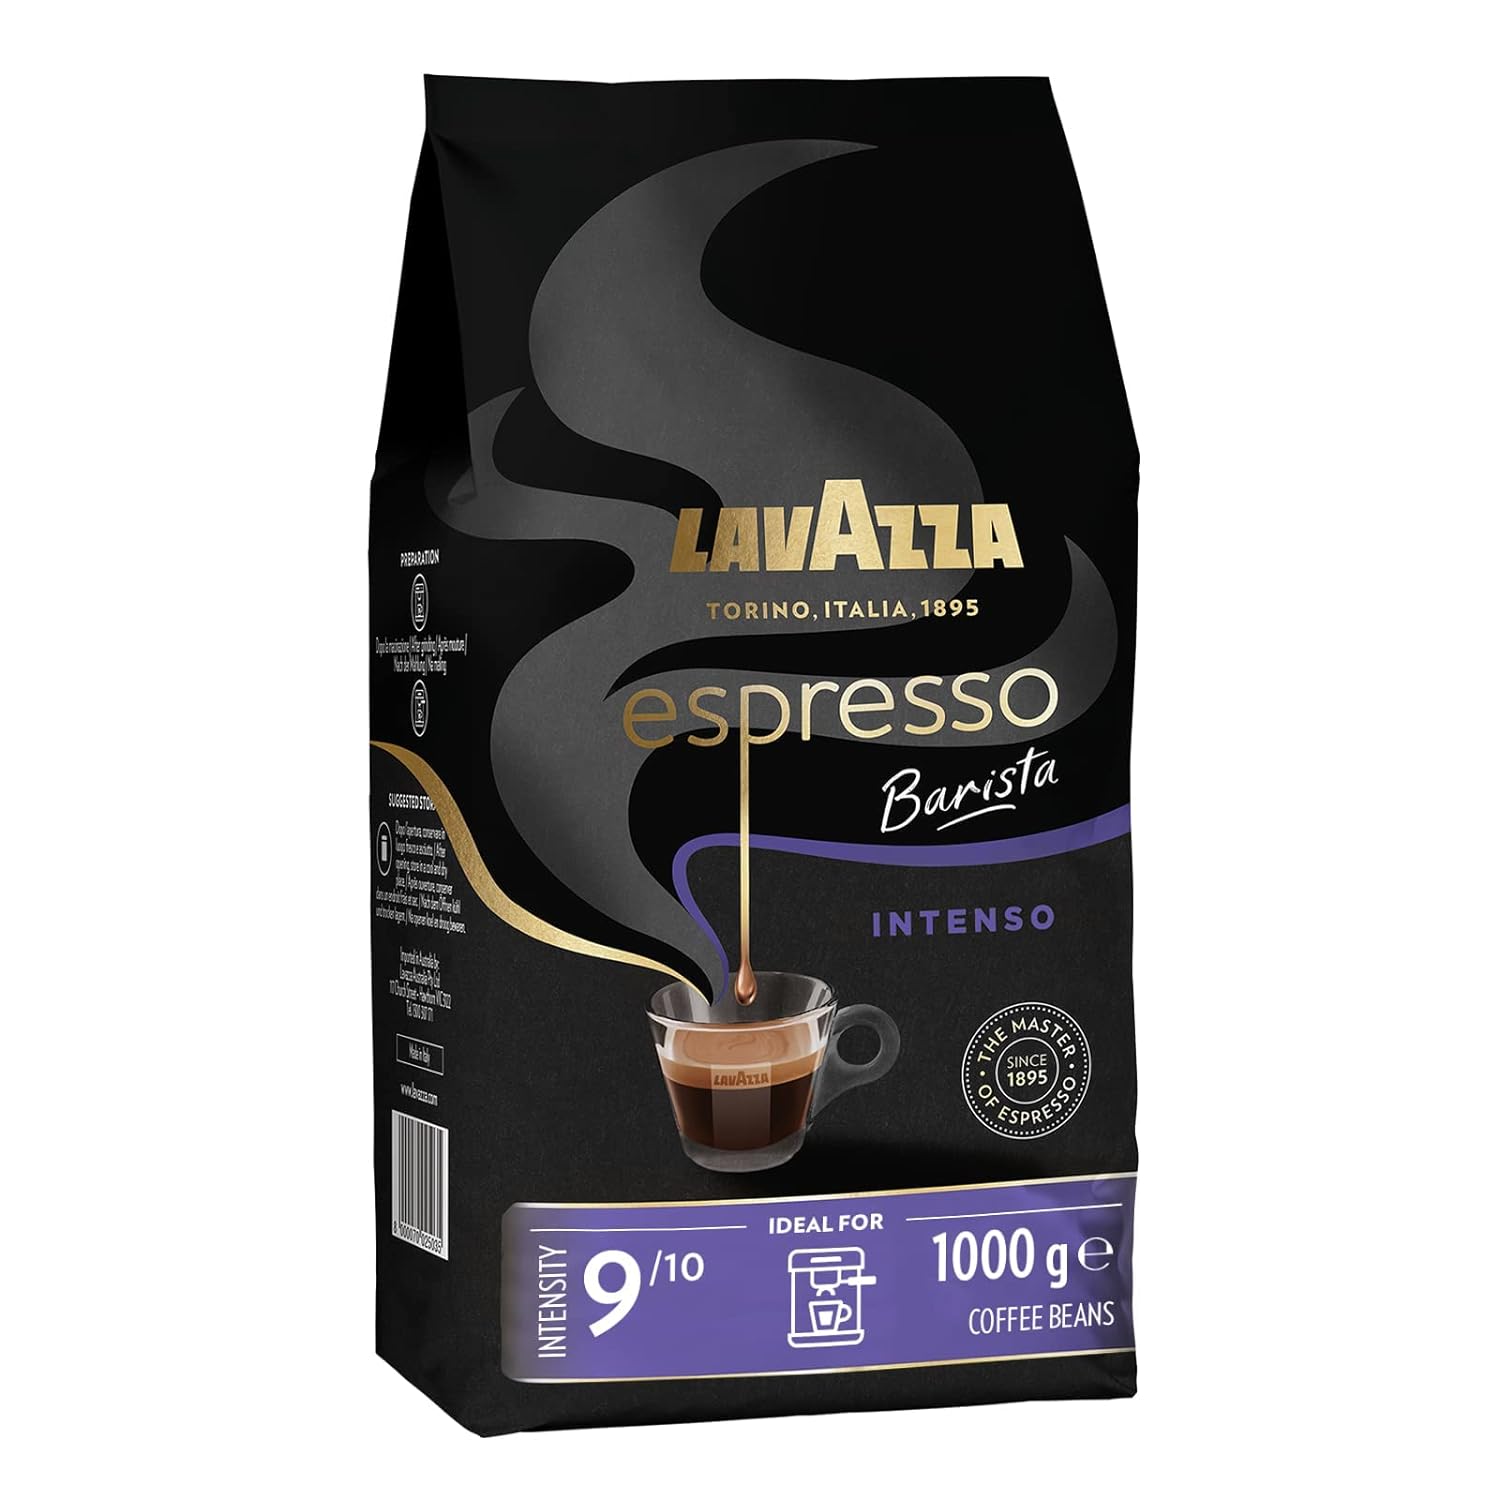 Lavazza, Espresso Barista Intego, entire Arabica and Robusta coffee beans, with cocoa and wooden aromas, for an intensive coffee, intensity 9/10, medium roasting, 1 kg pack